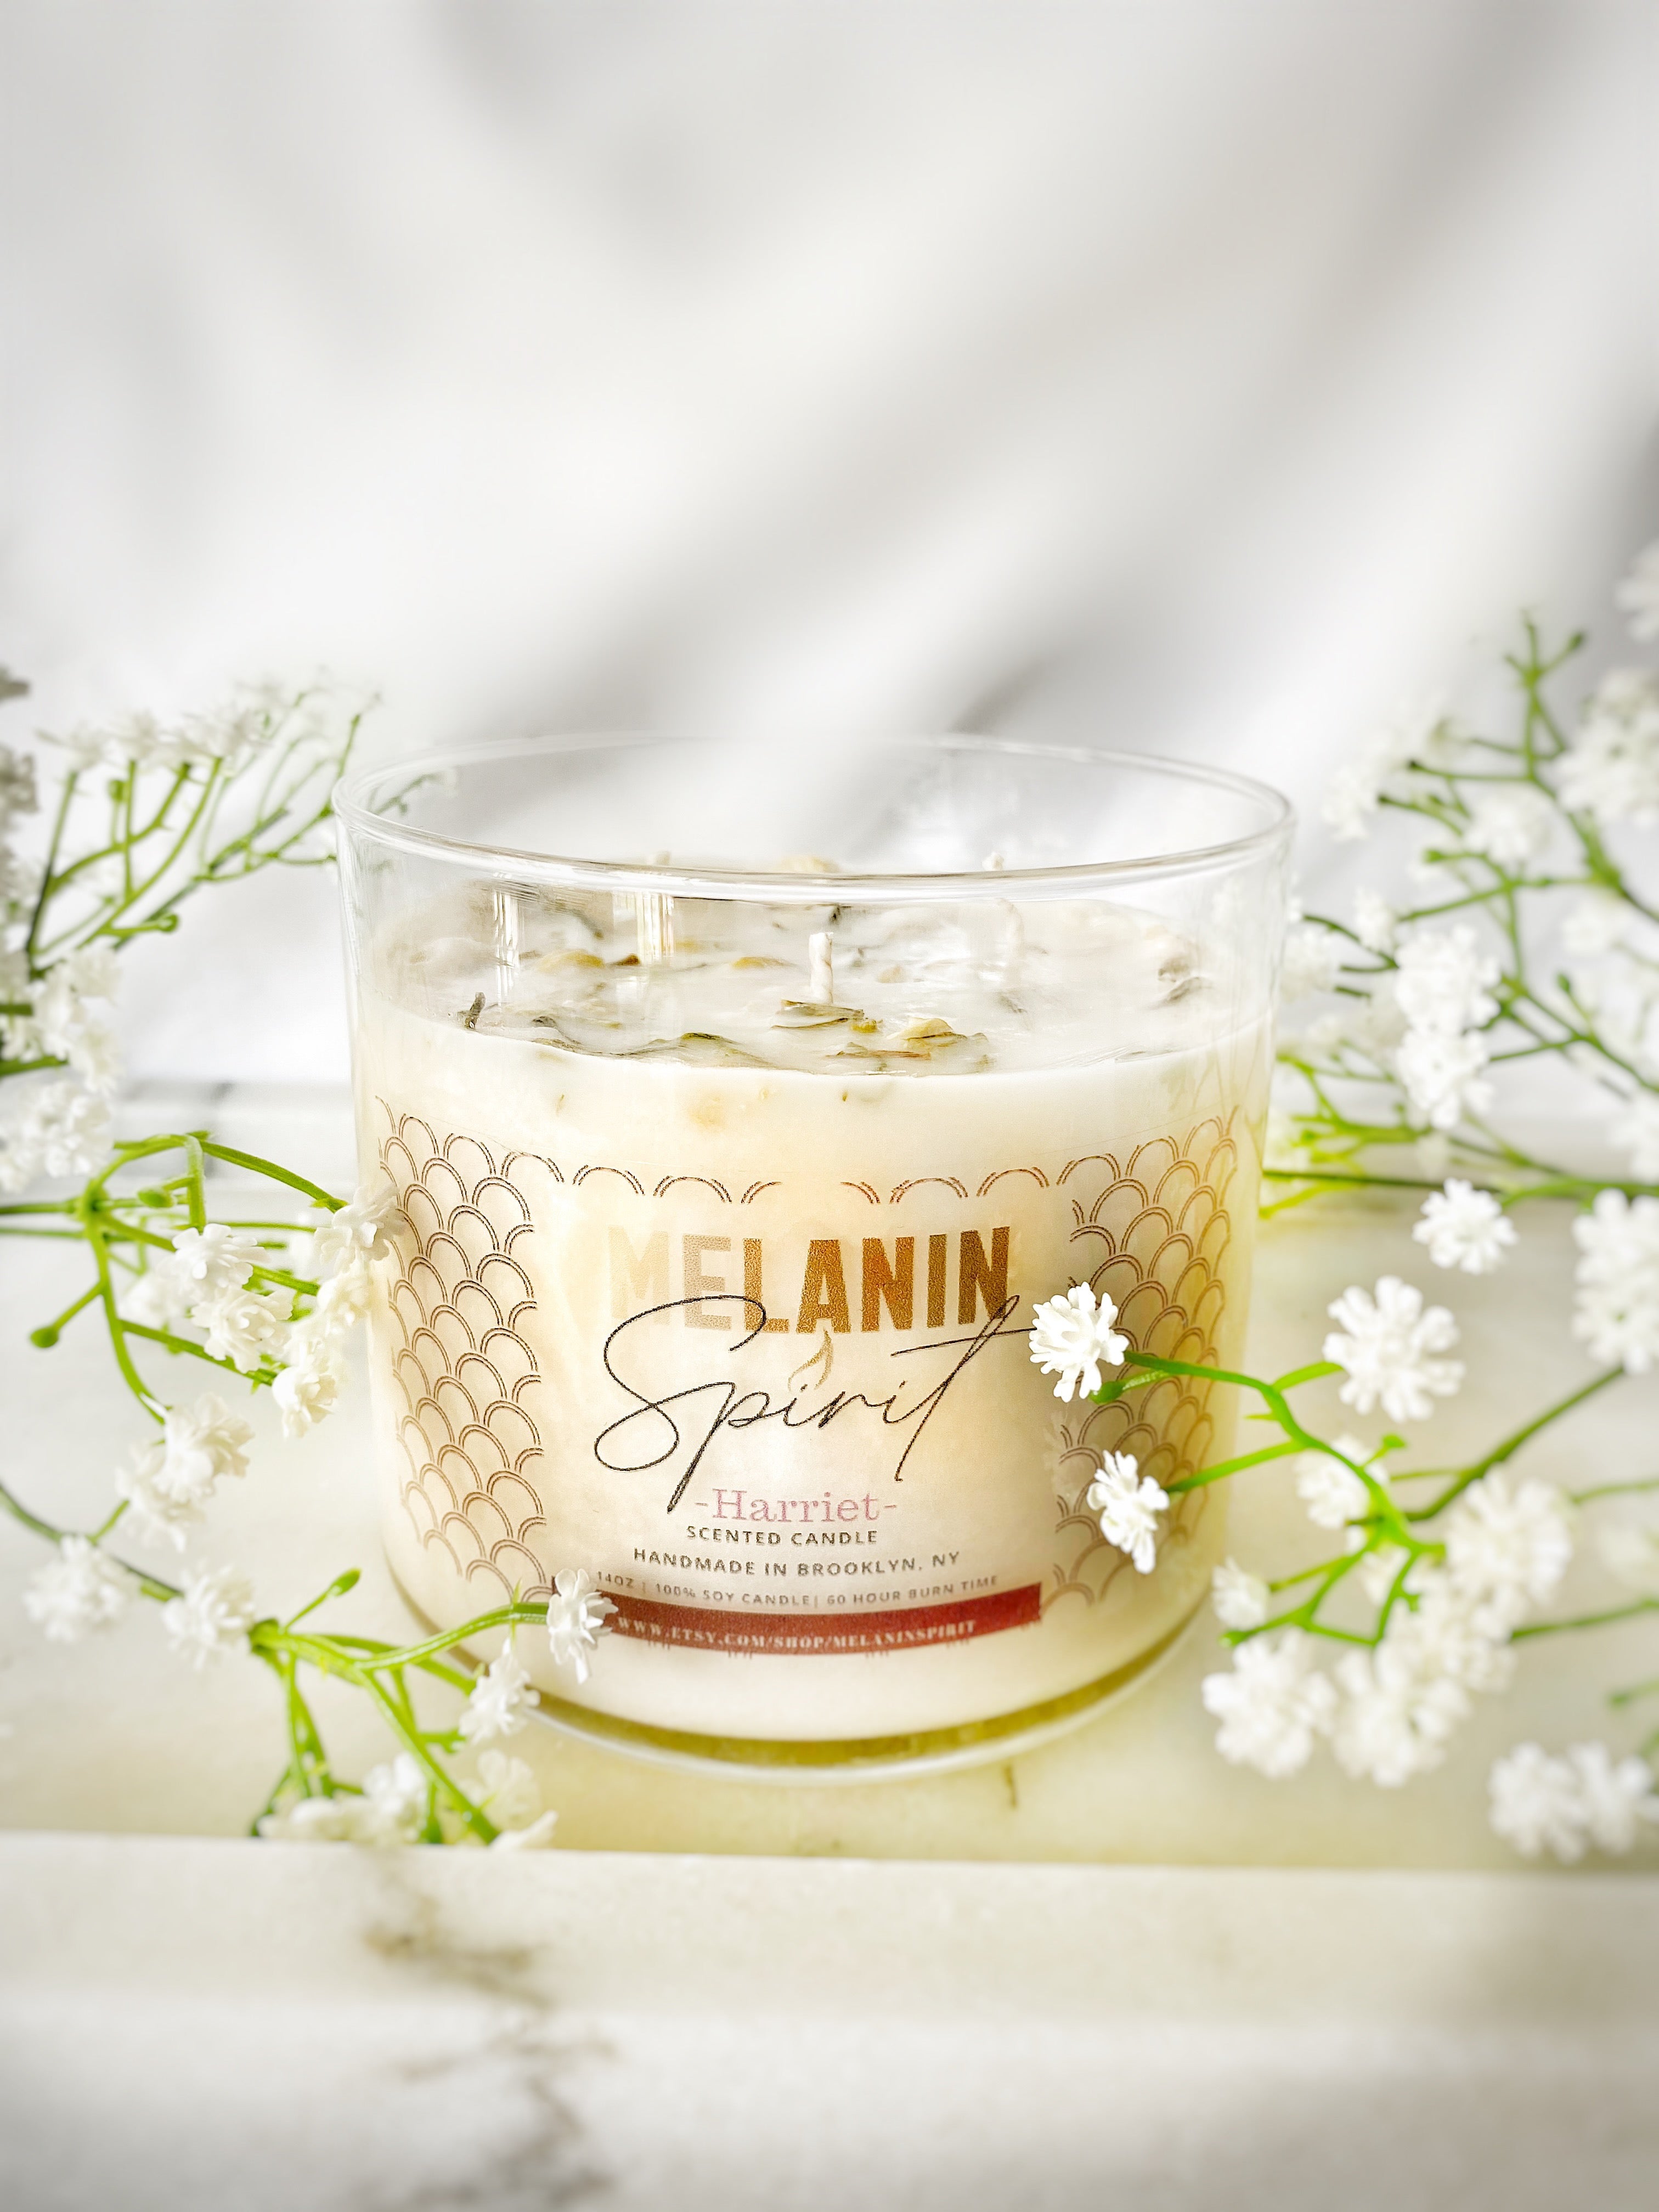 Harriet Tubman Inspired Scented Candle with notes of cactus blossoms and Jasmine.